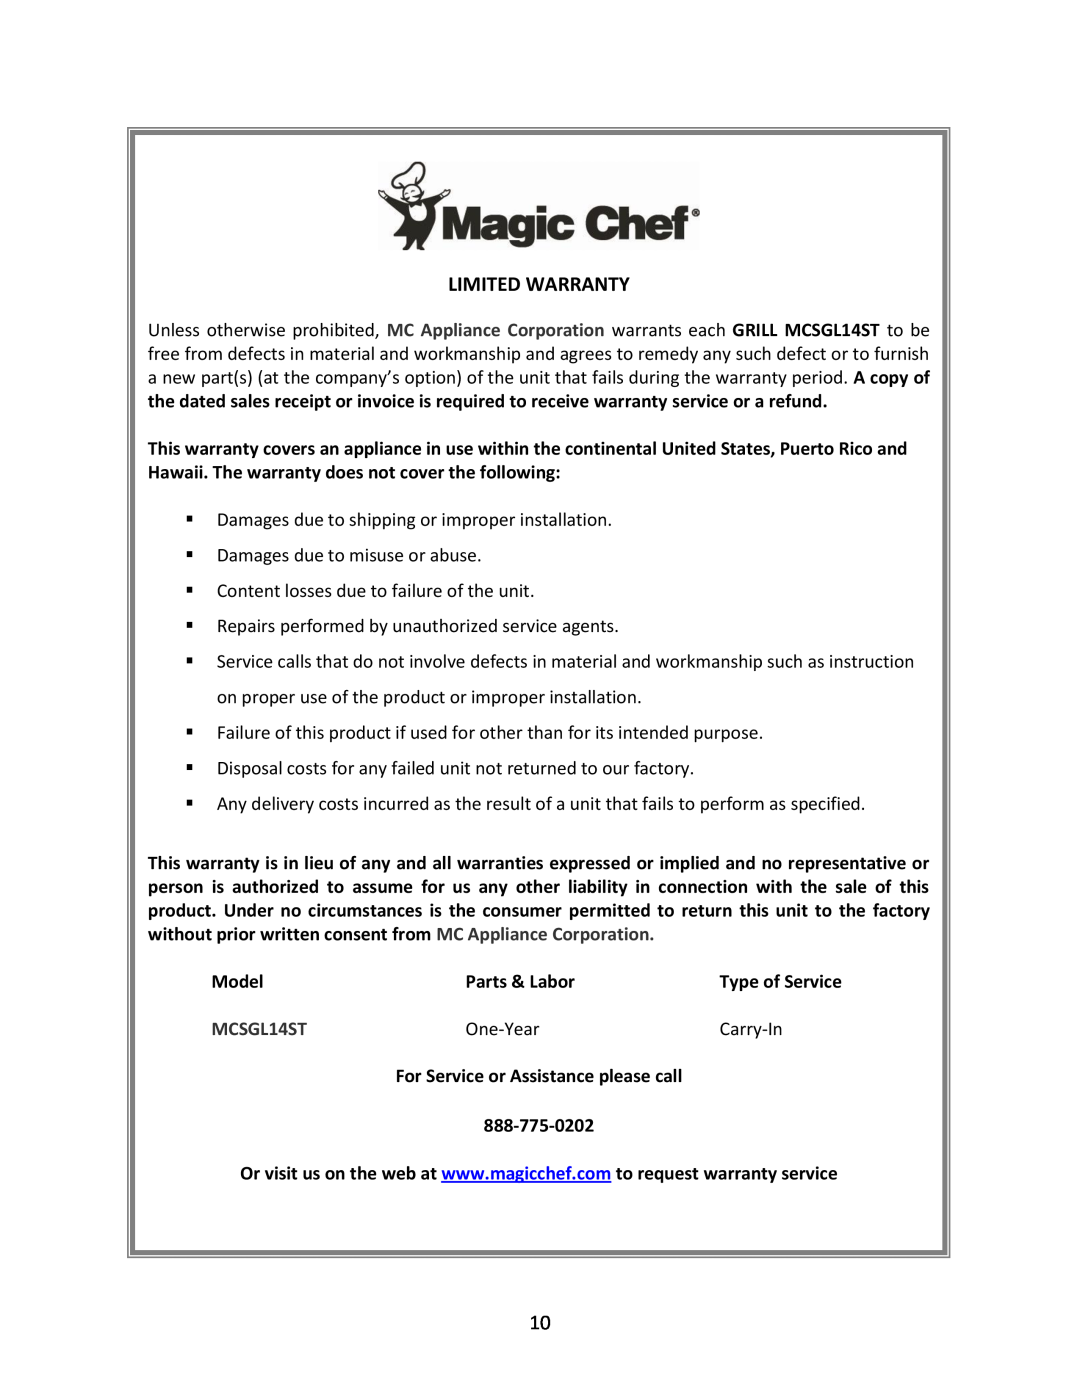 Magic Chef MCSGL14ST instruction manual Model, Parts & Labor, One-Year, Carry-In 